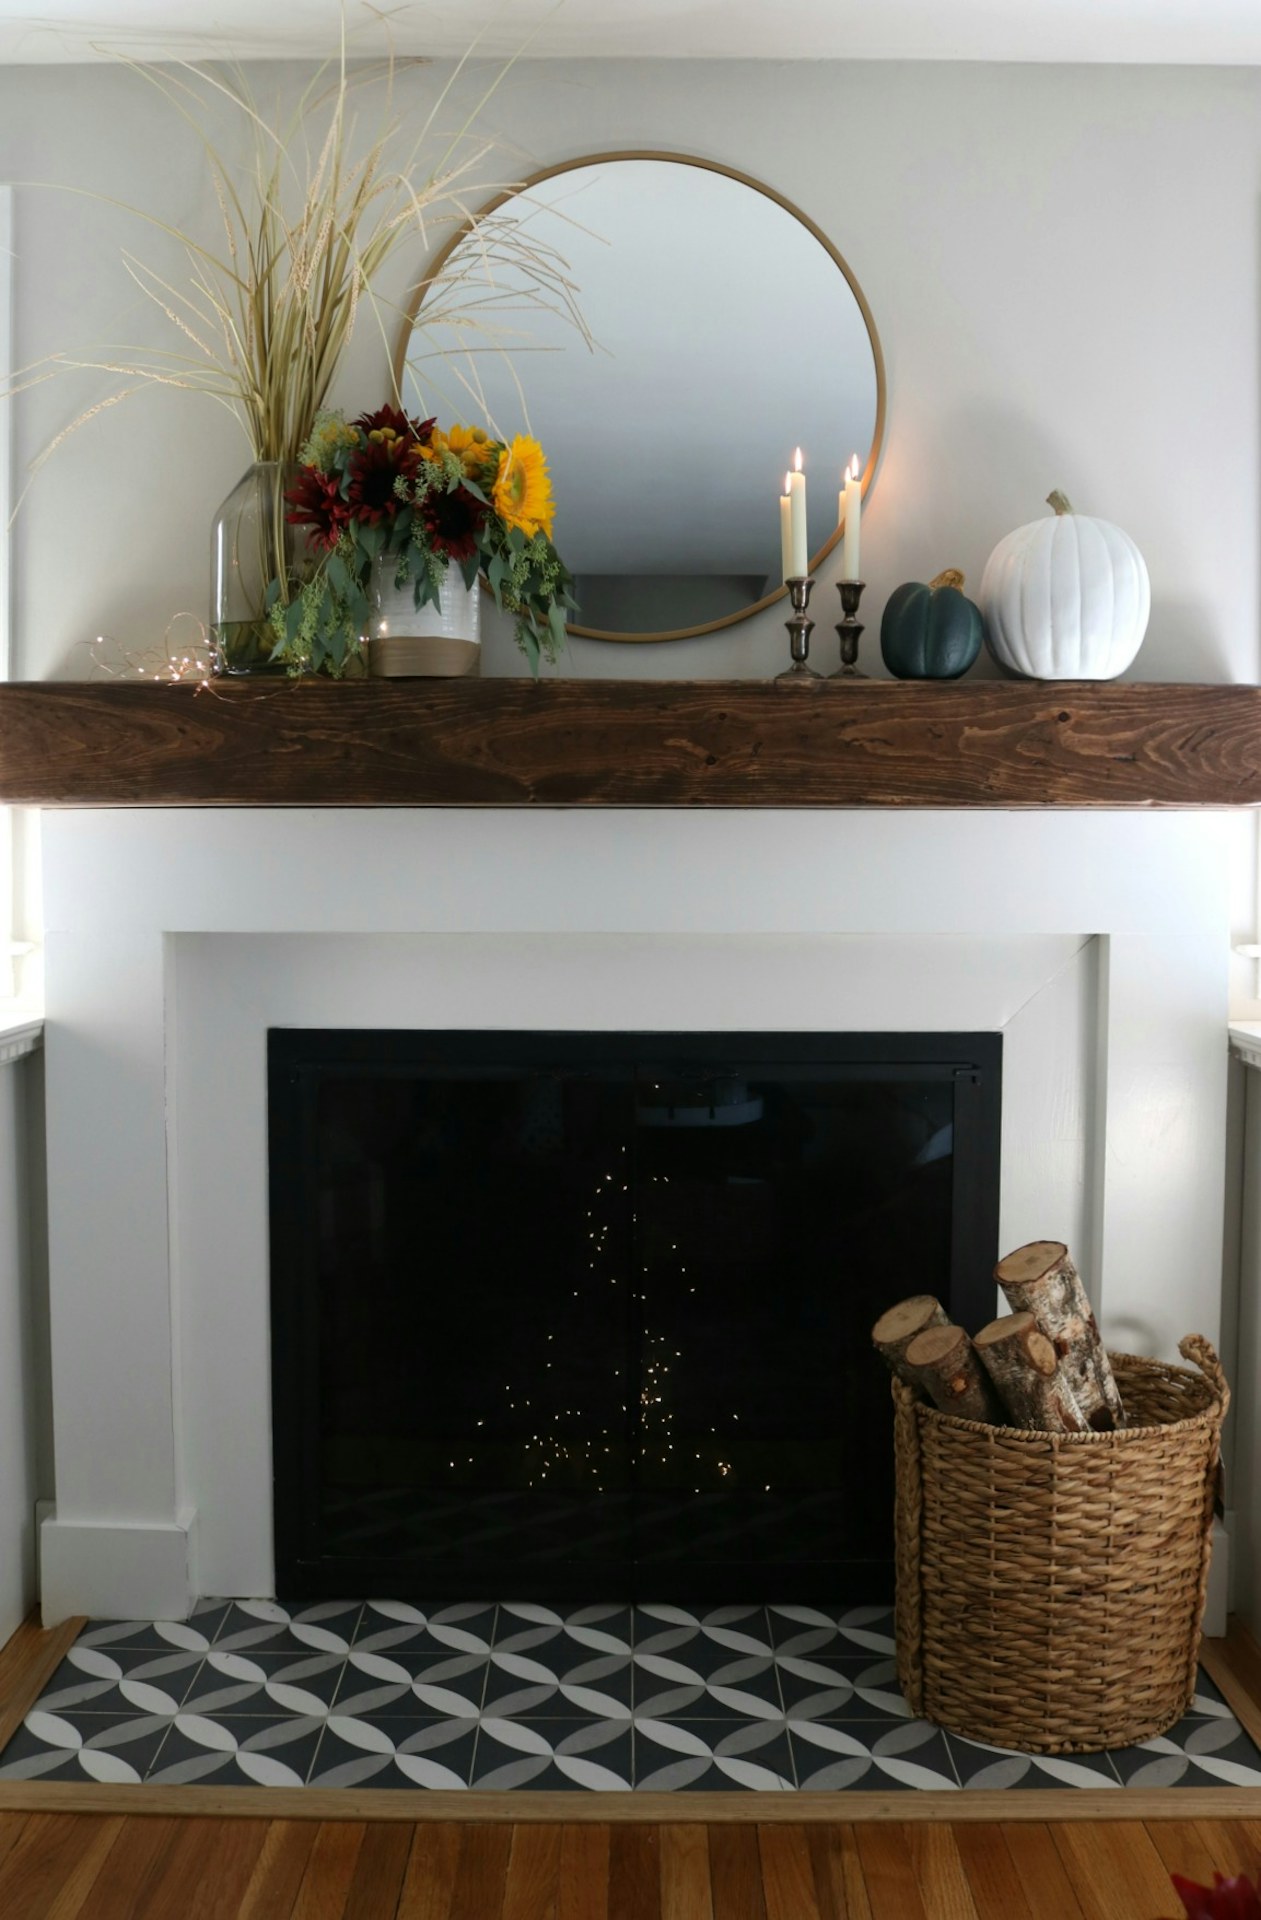 Fireplace and Flowers